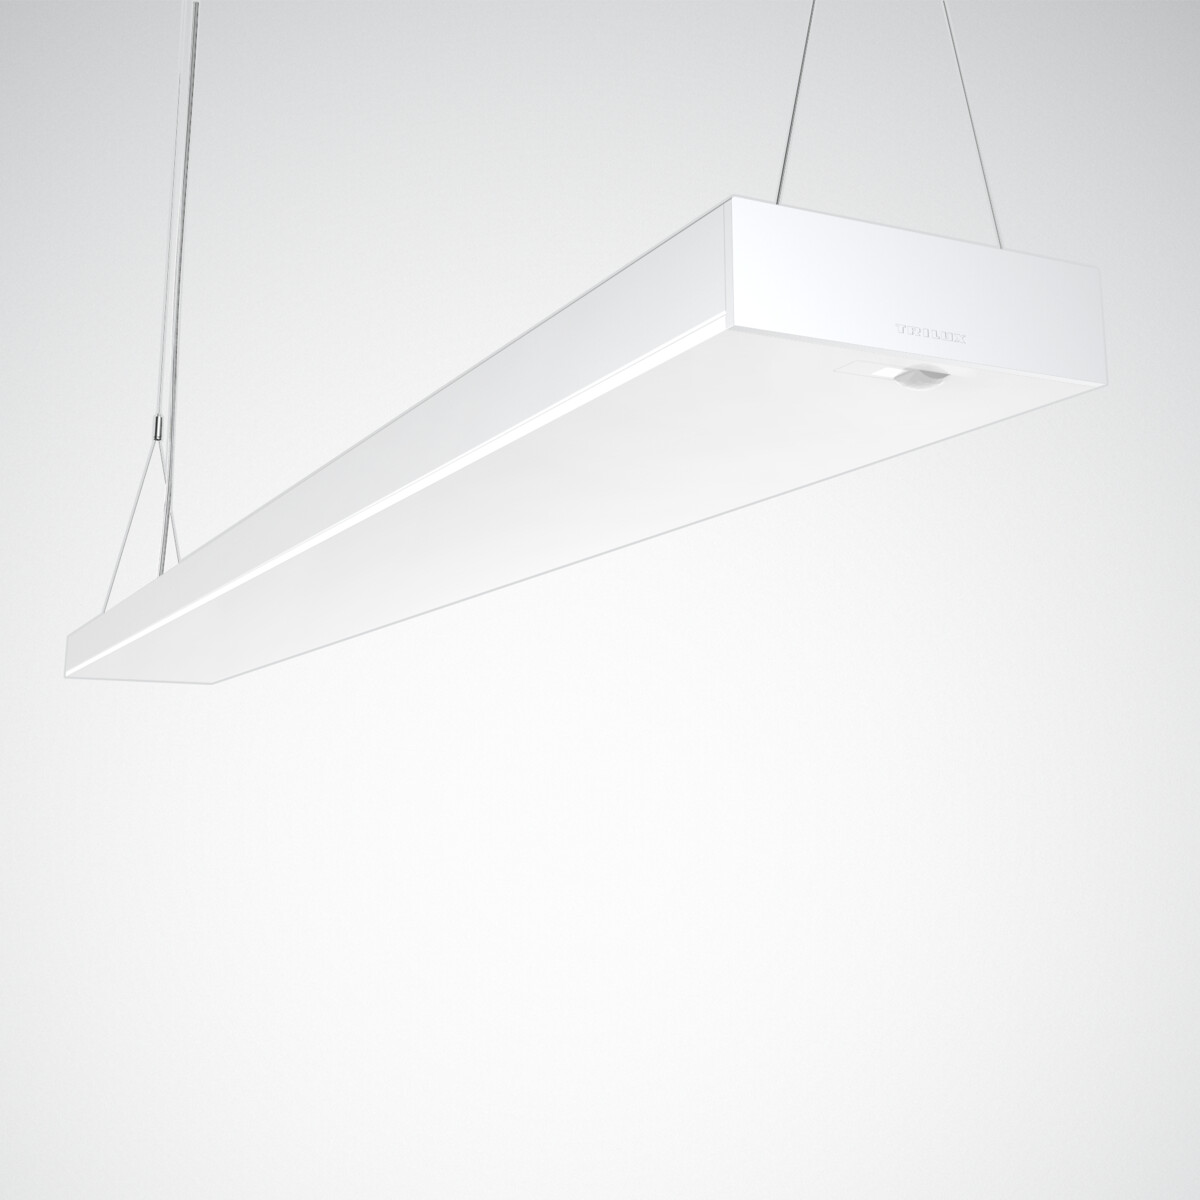 With LiveLink WiFi › H1, 160 x 1127 mm › Diffuse, wide distribution (UGR19)  › Opendo H LED suspended luminaire › Suspended luminaires › Indoor lighting  › TRILUX products